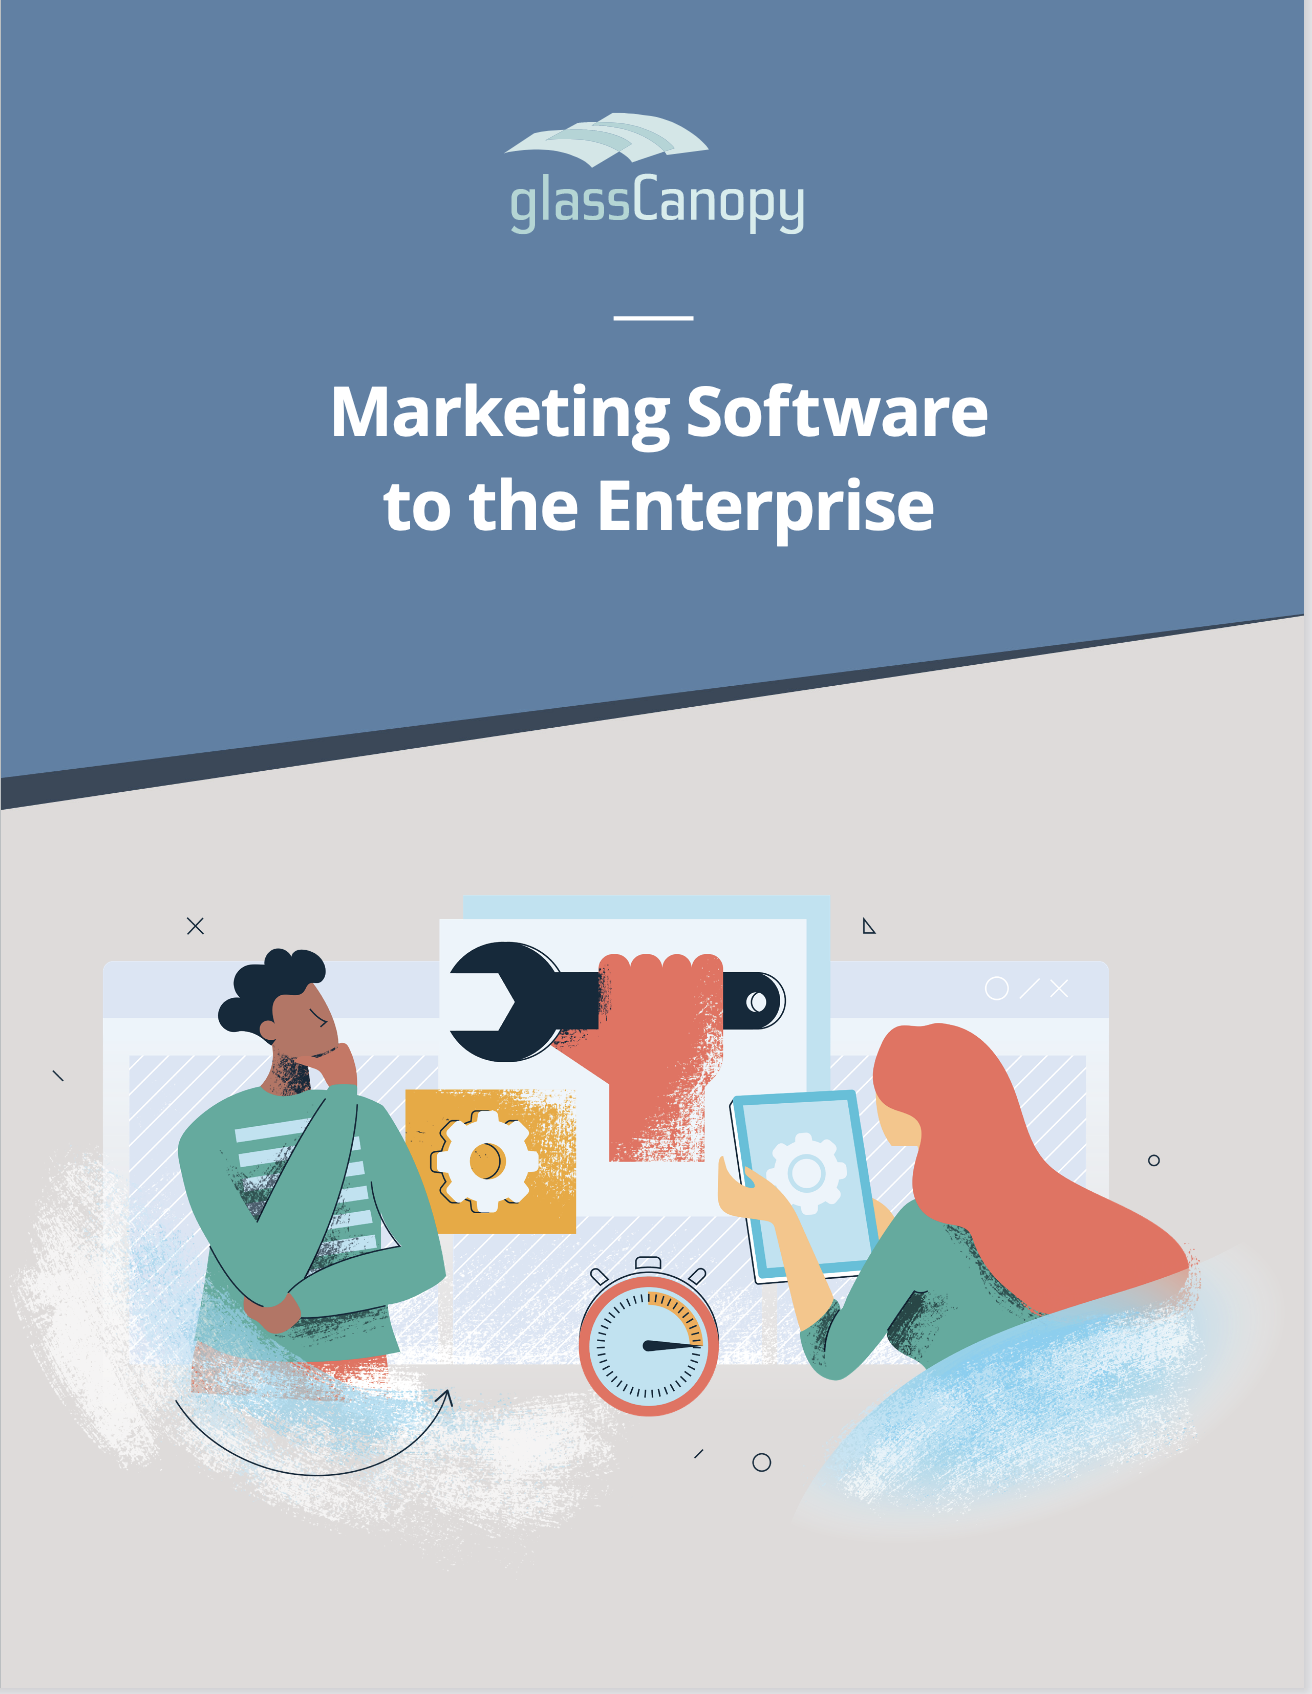 Marketing Software to the Enterprise